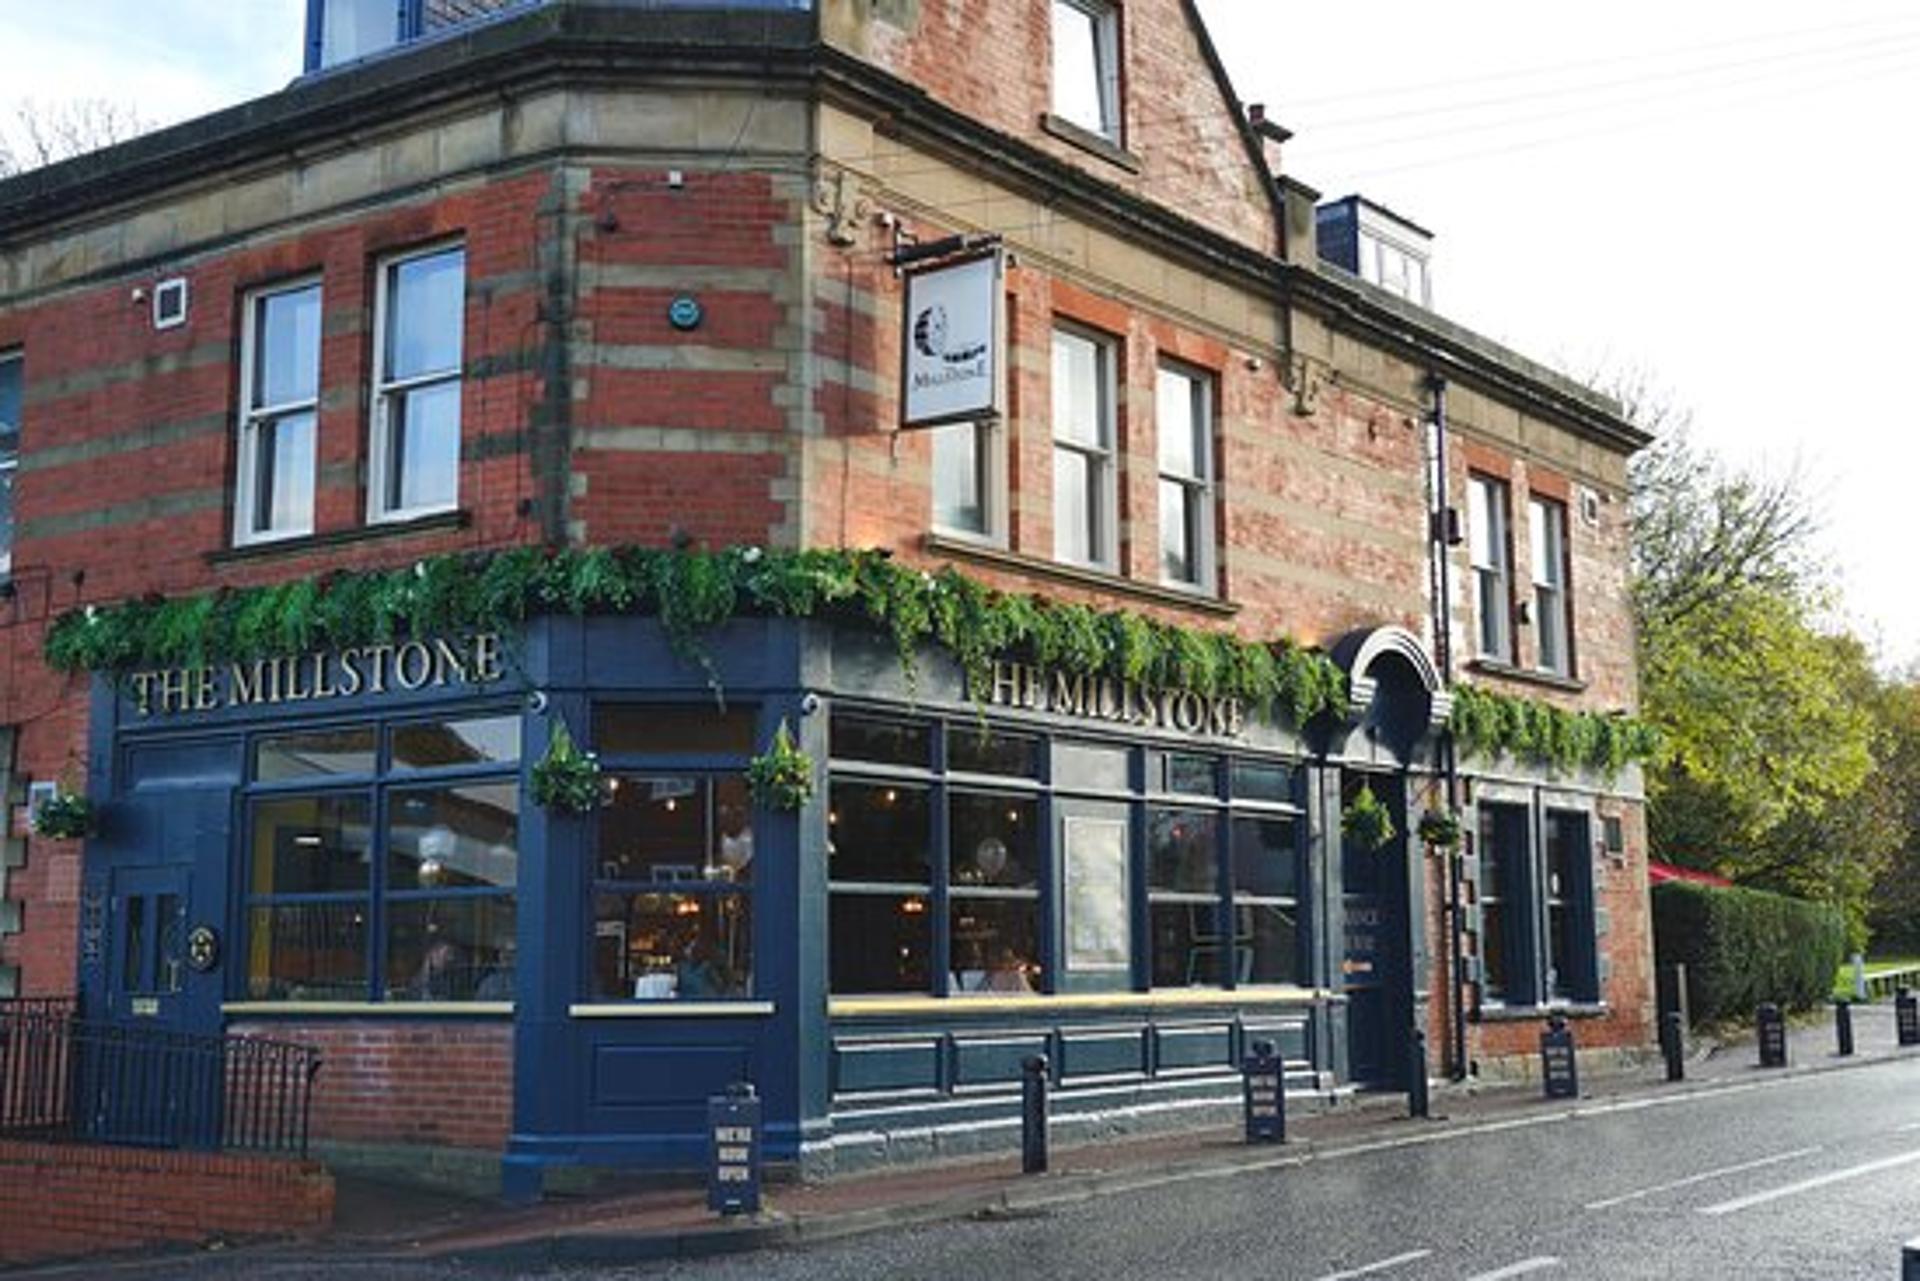 Portfolio of North East and Yorkshire pubs comes to market